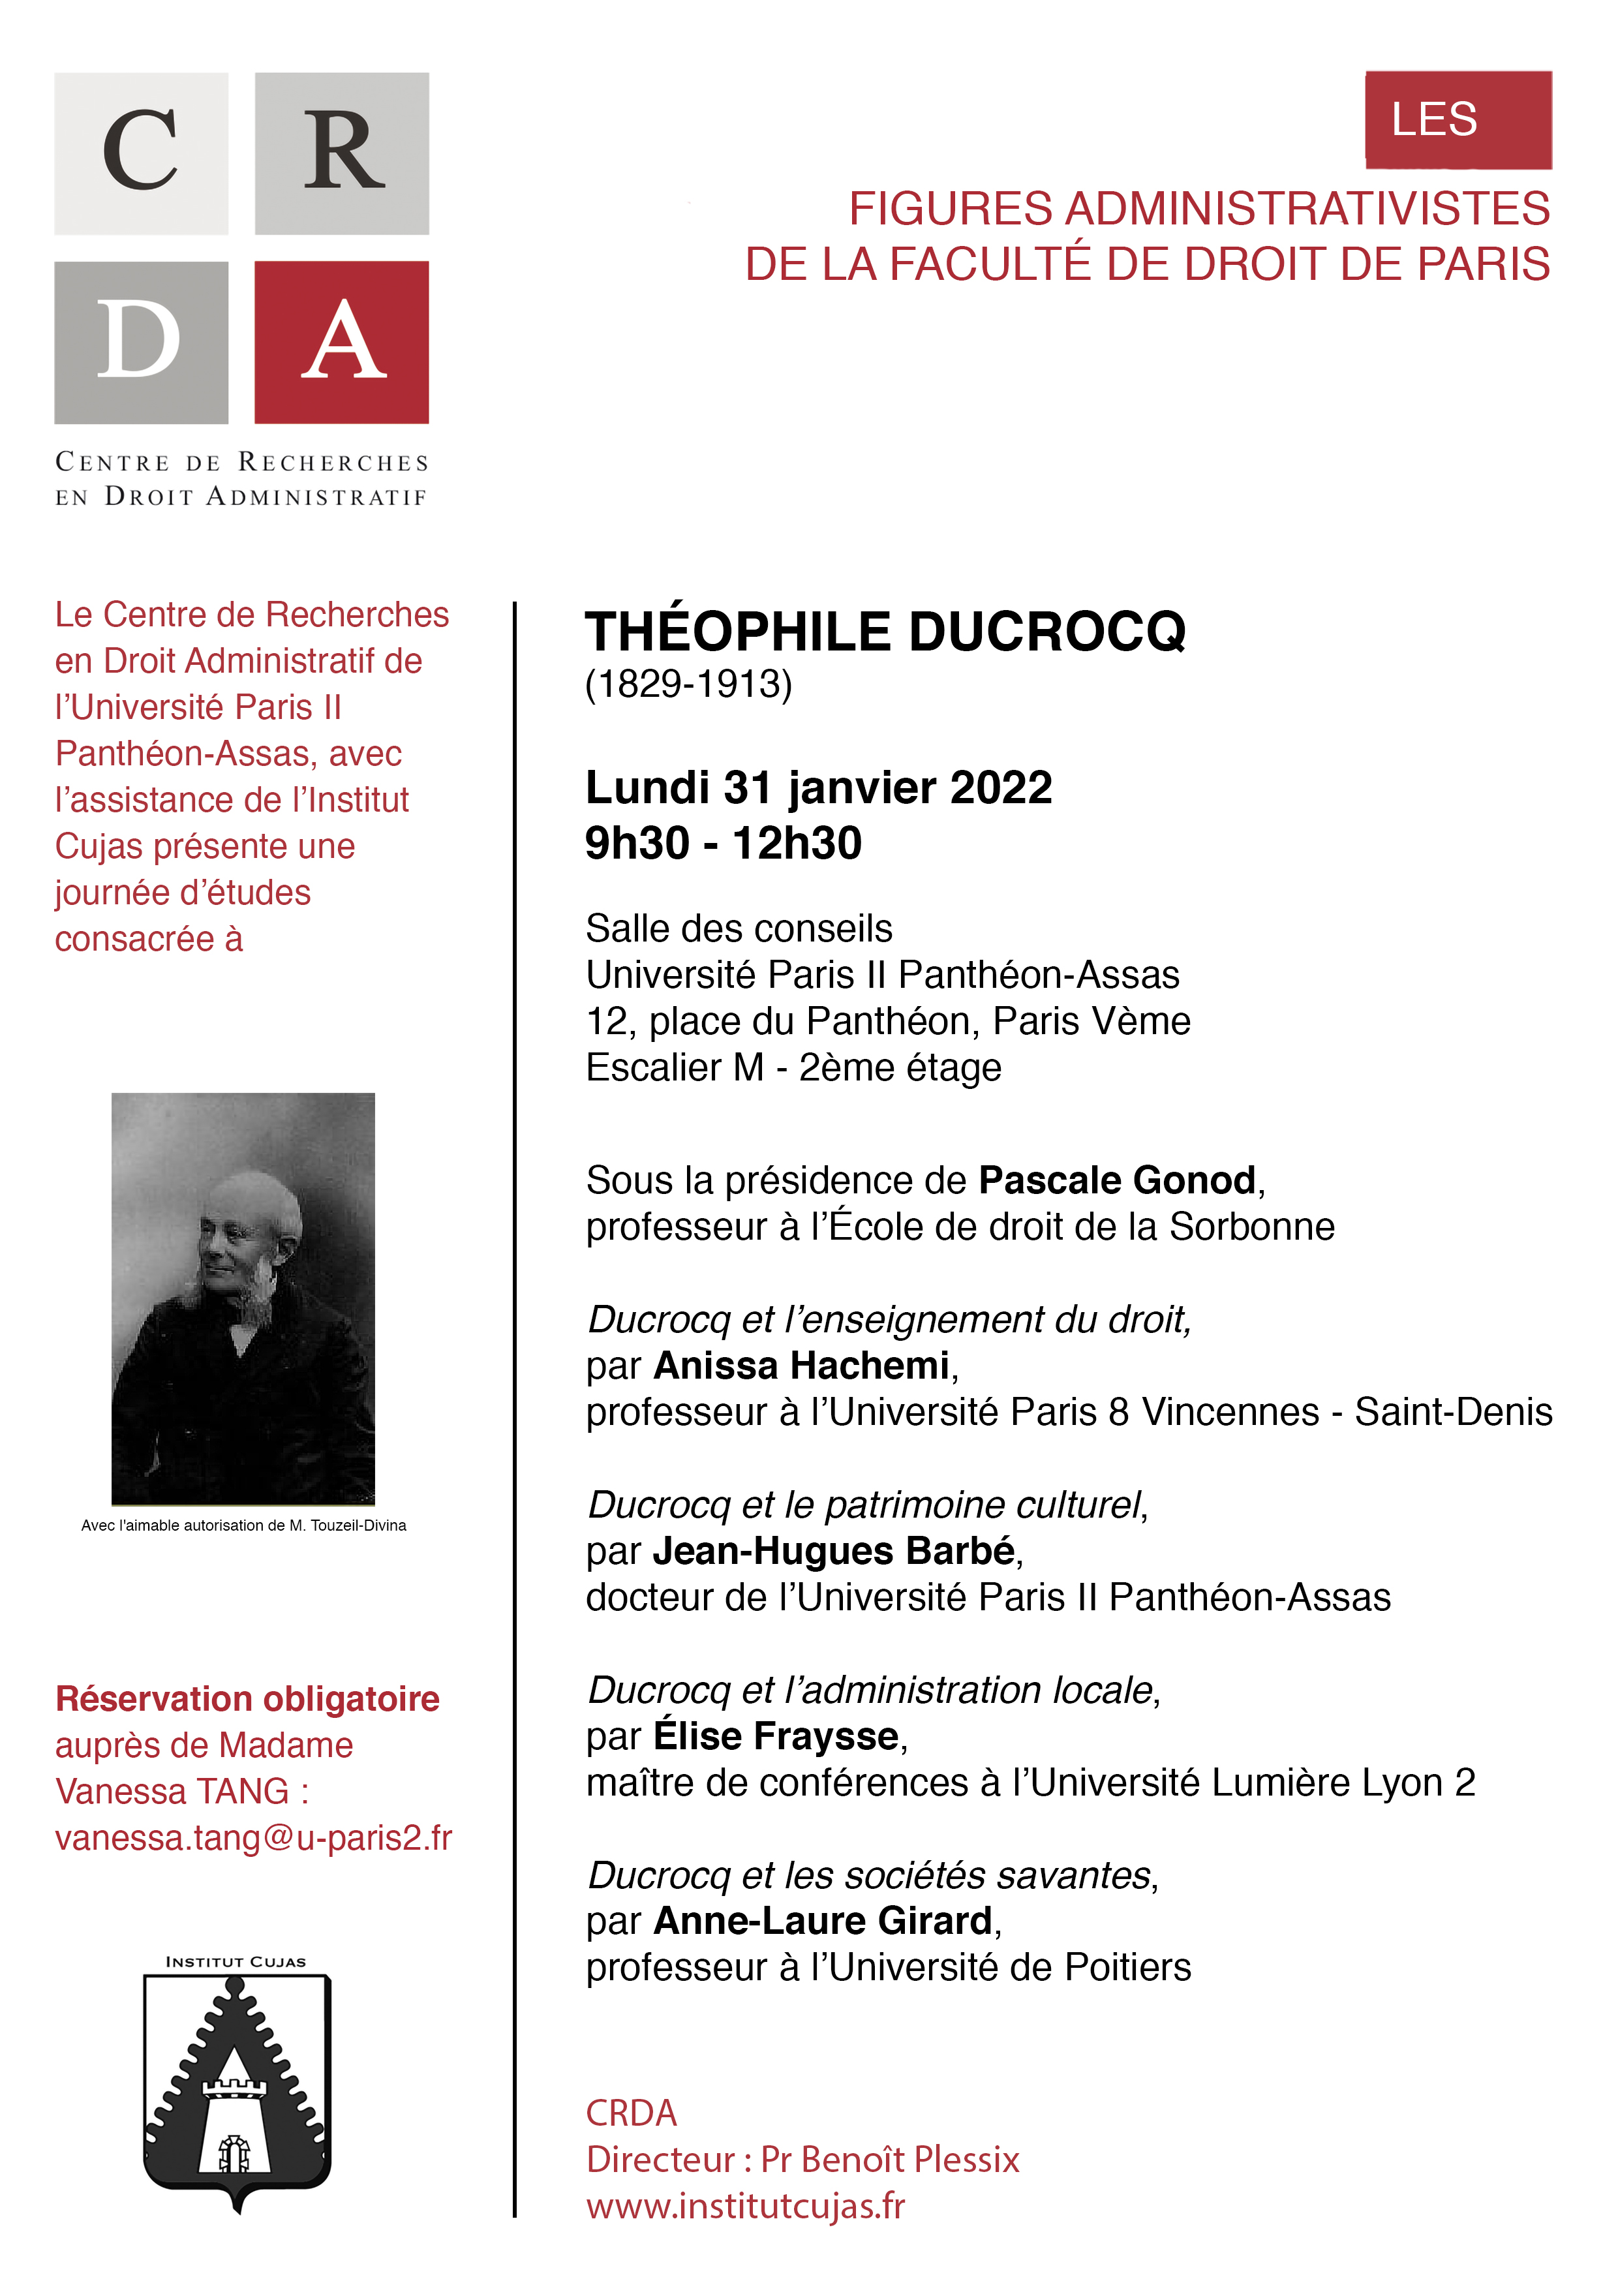 conference_crda_-_theophile_ducrocq_-_janvier_2022